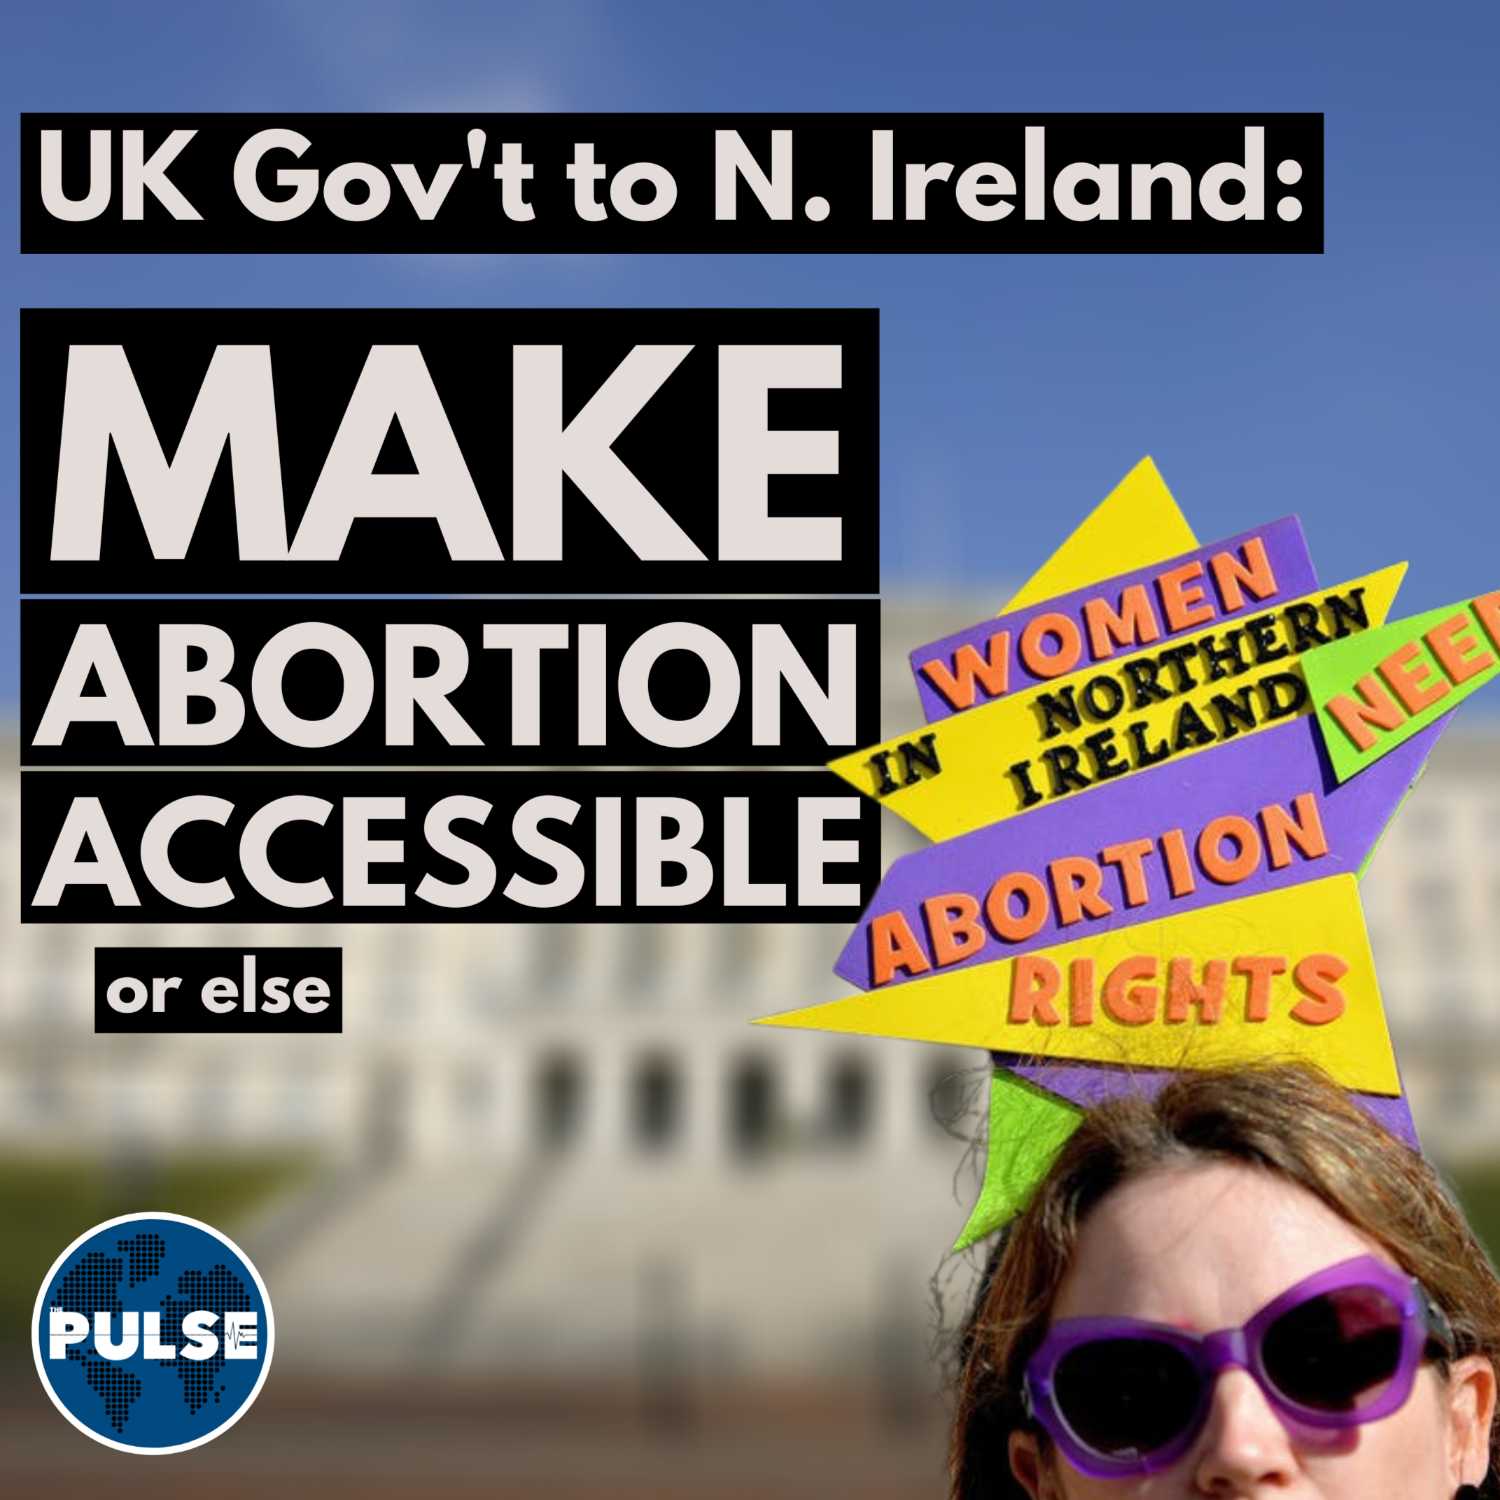 PULSE: UK government pressures N. Ireland to promote abortion access (and other news items)